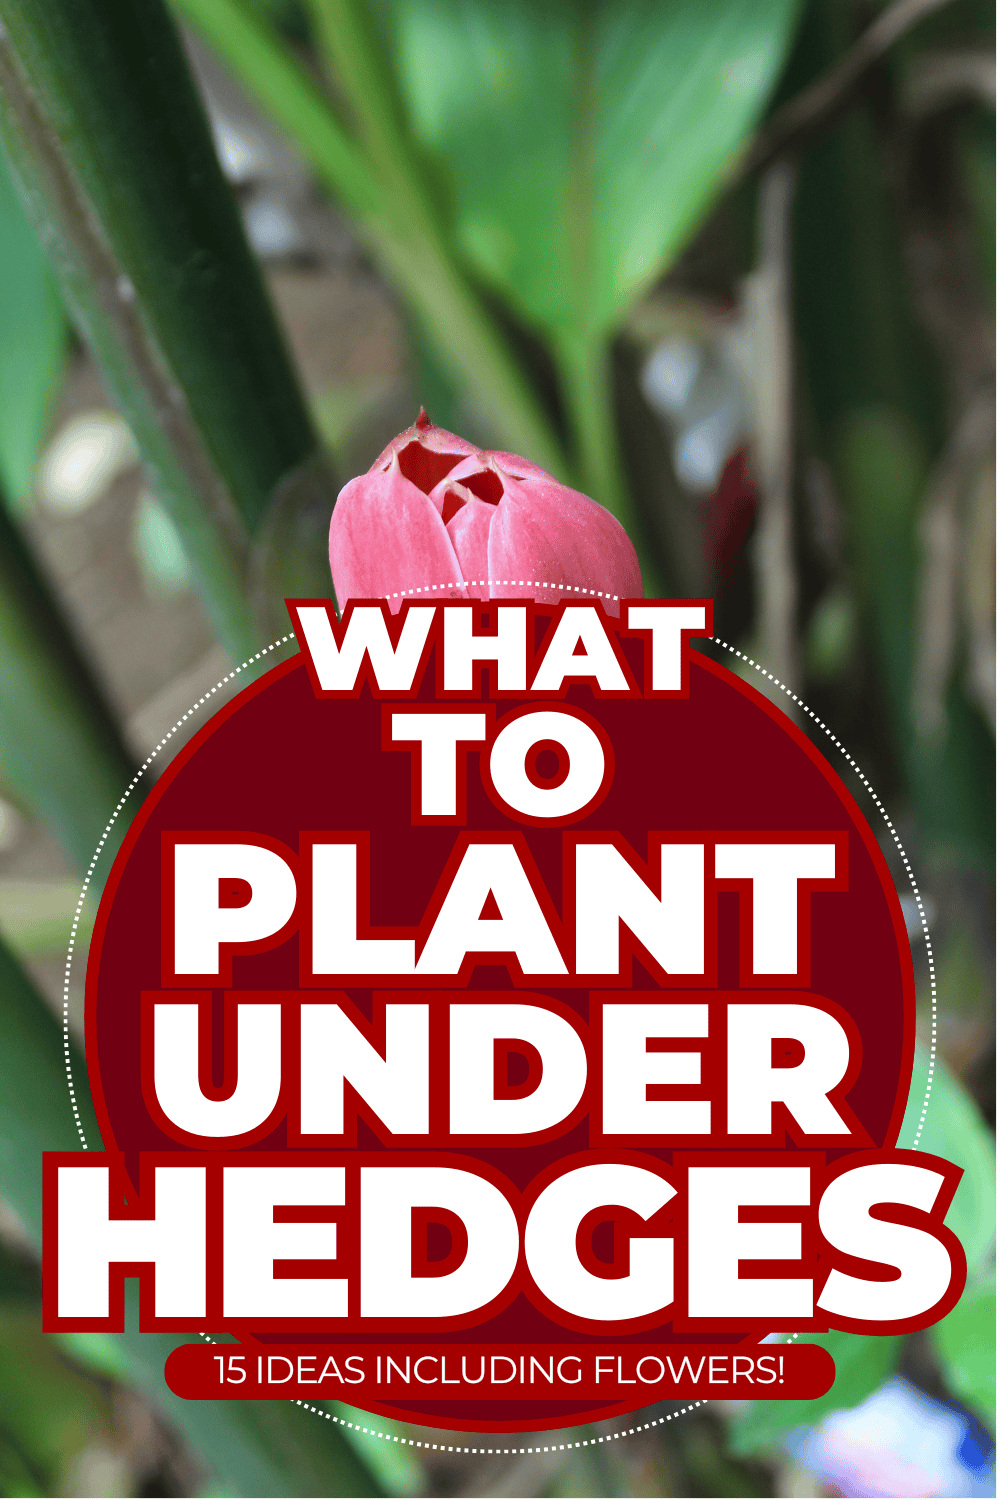 What To Plant Under Hedges [15 Ideas Including Flowers!]